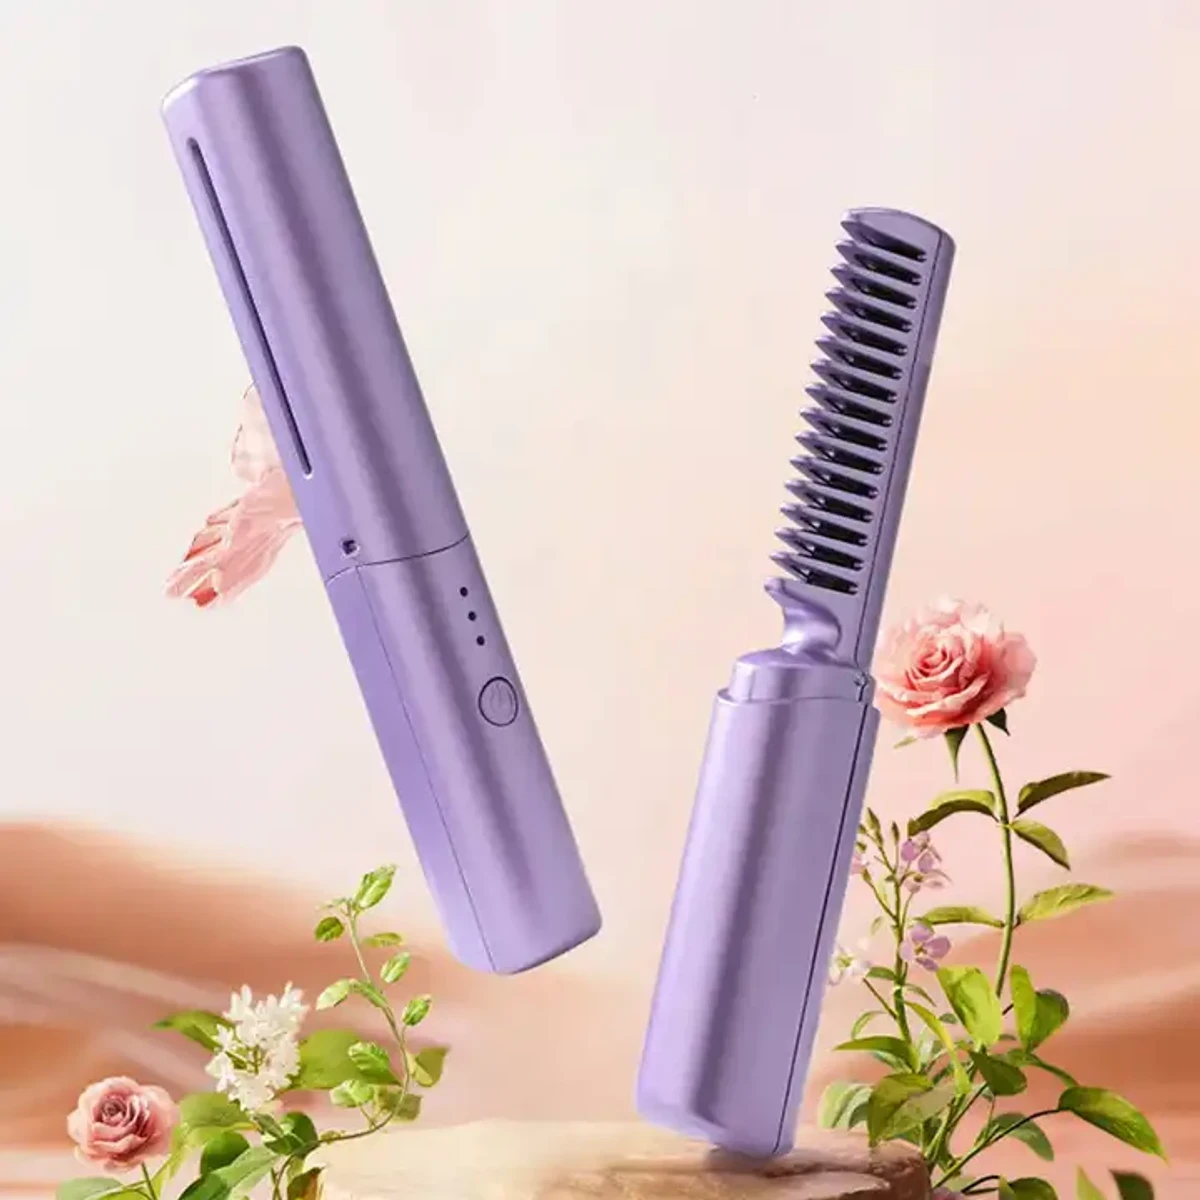 2 in 1 Wireless Hair Hot Comb